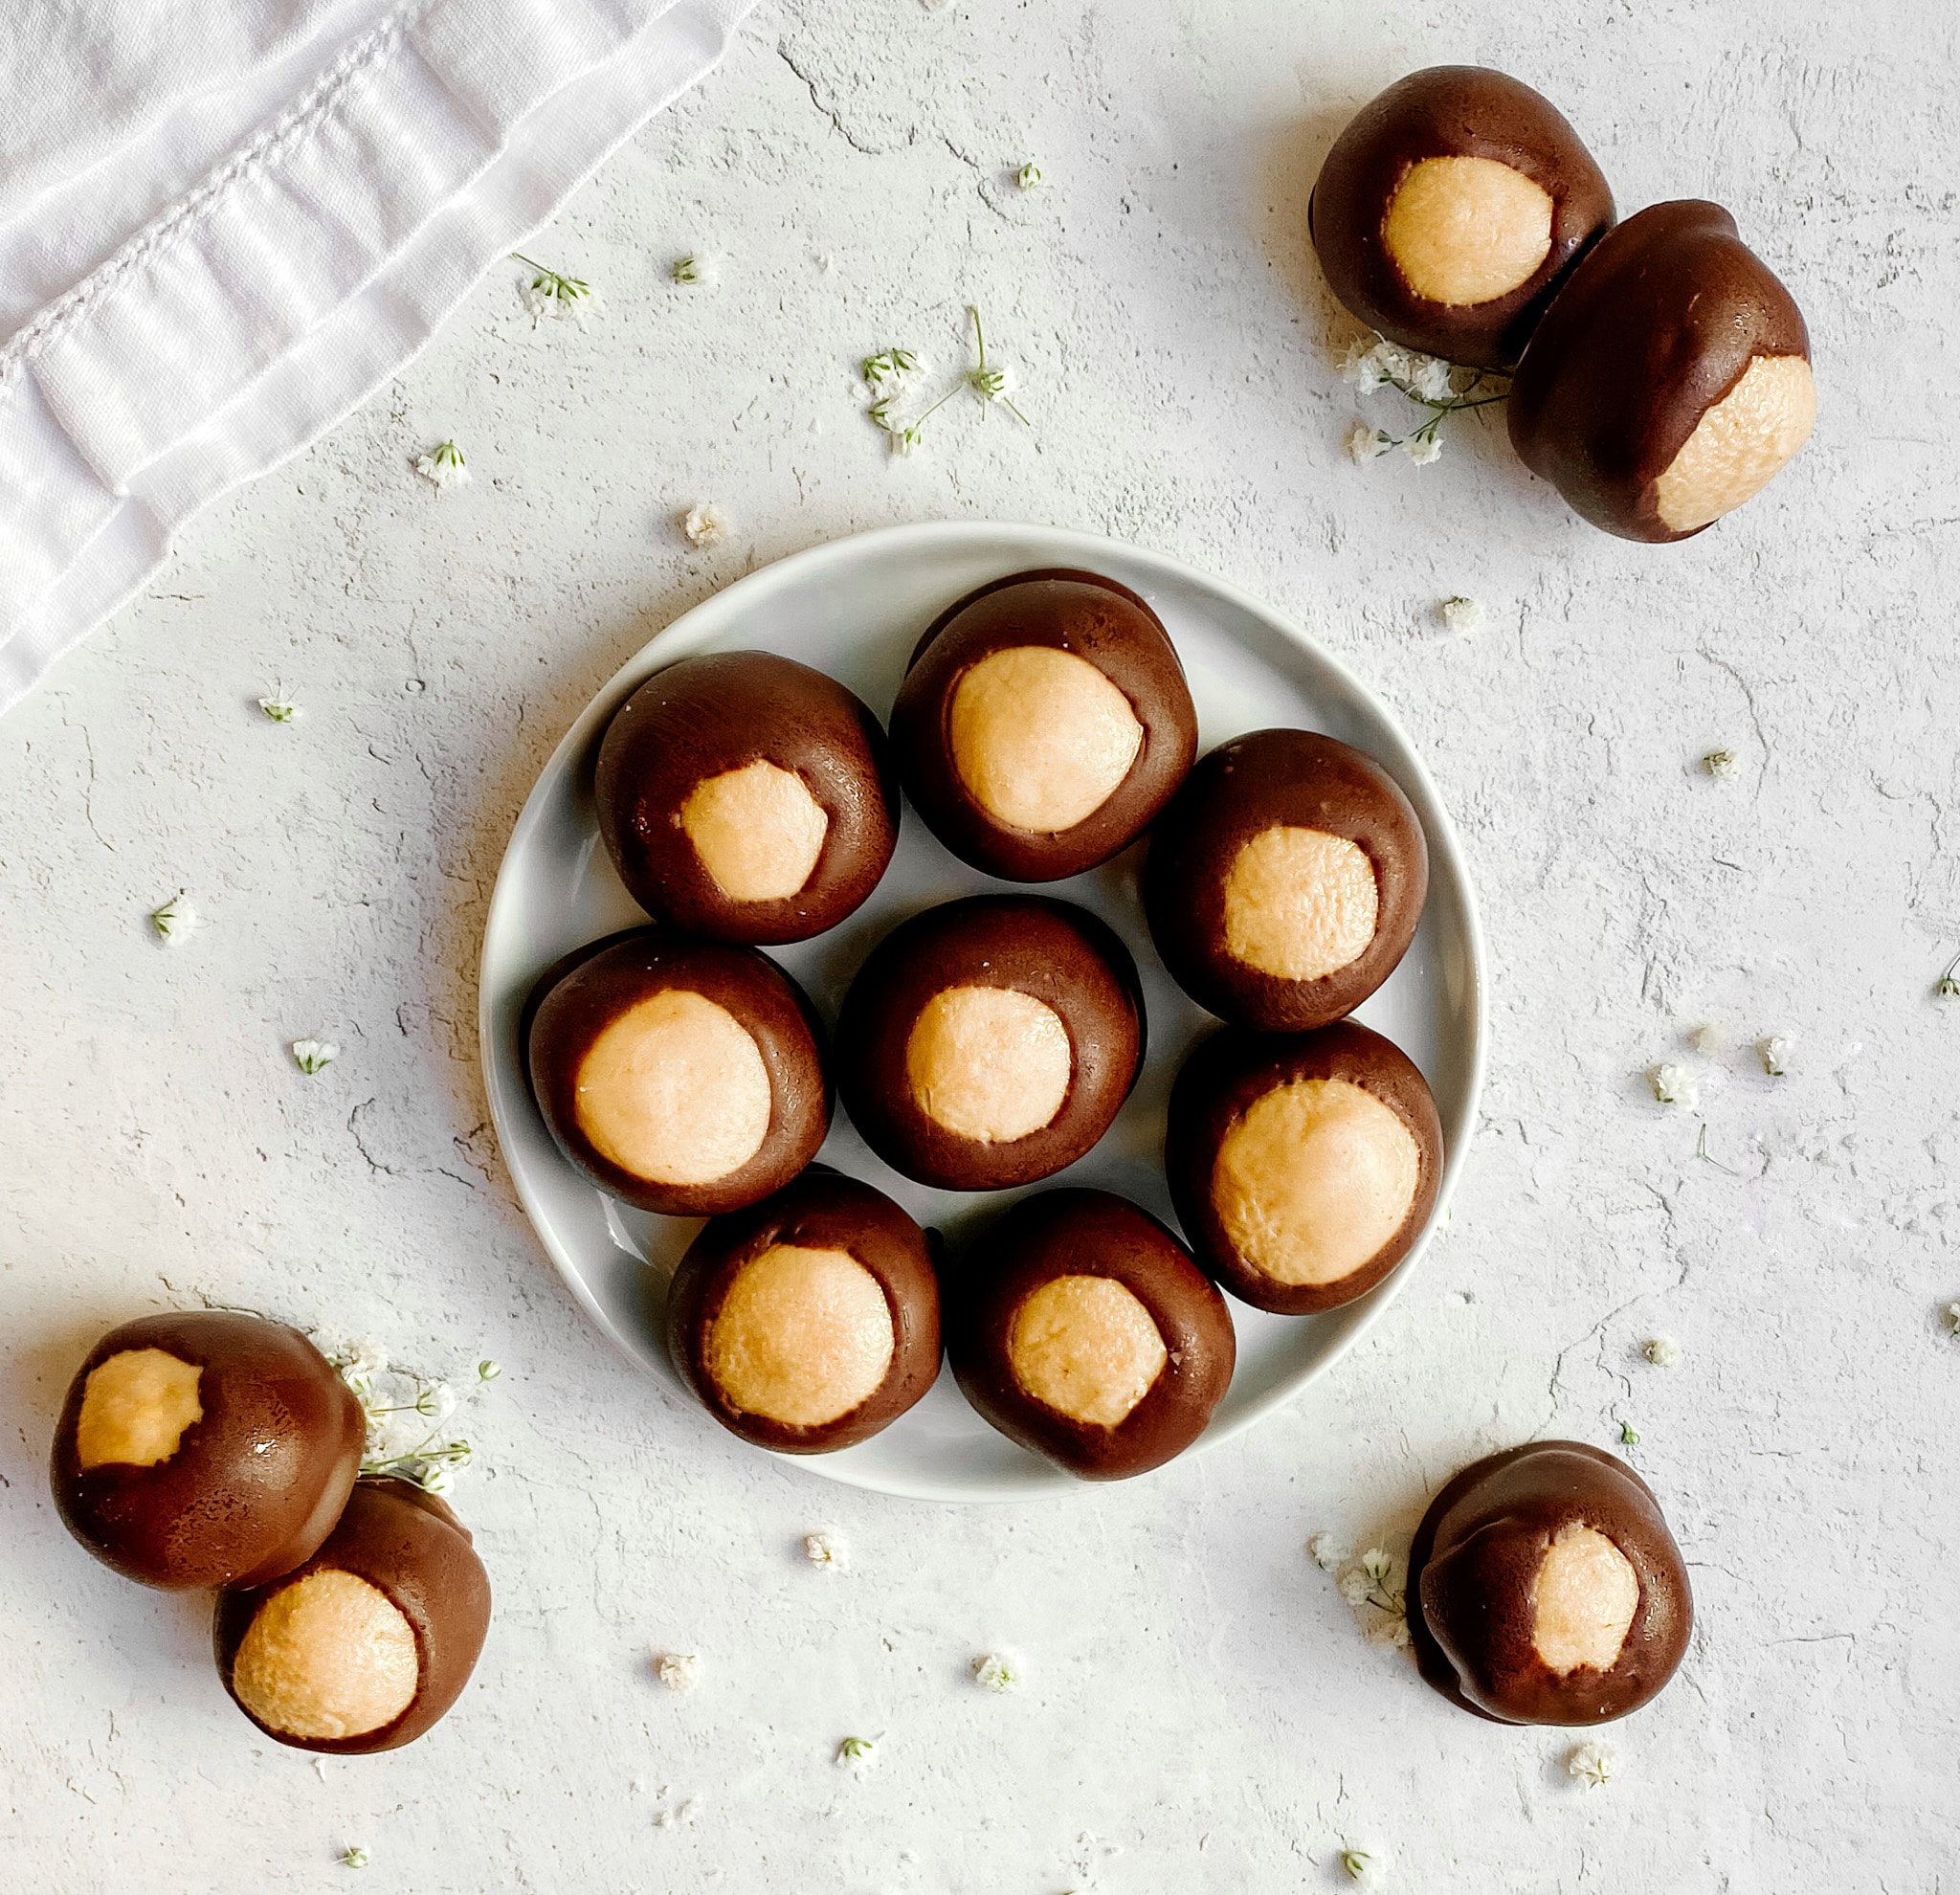 Peanut butter buckeyes on a small ceramic plate.